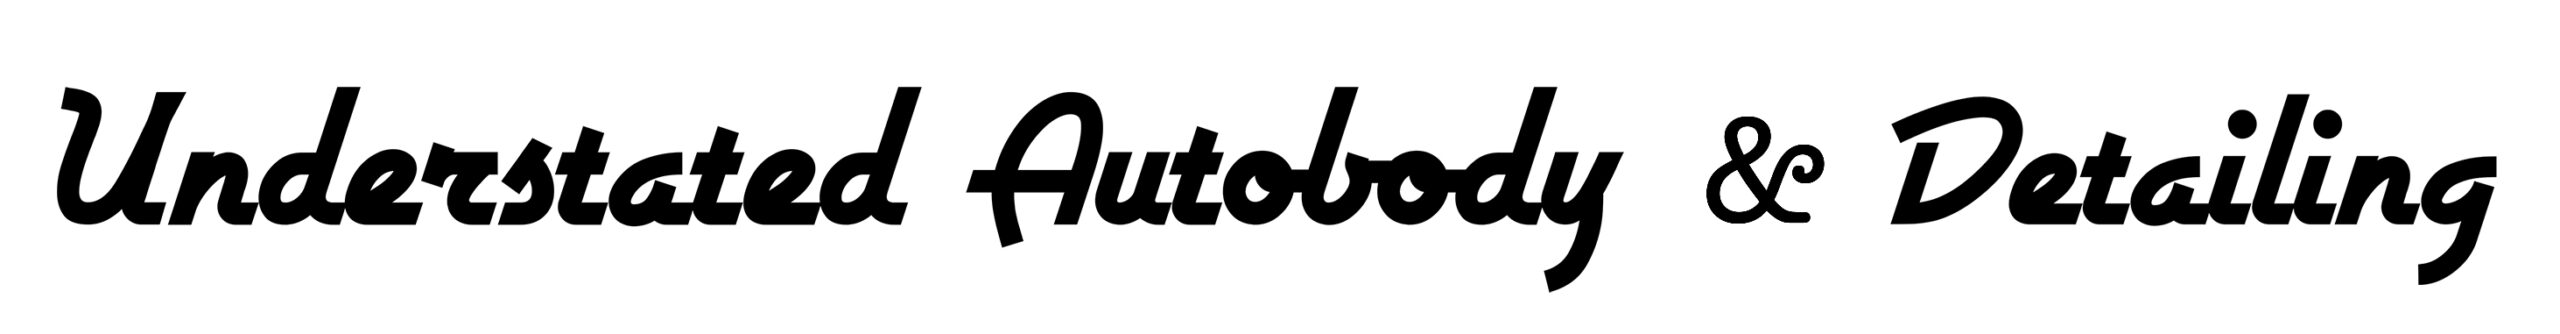 Understated Auto and Detail Logo copy